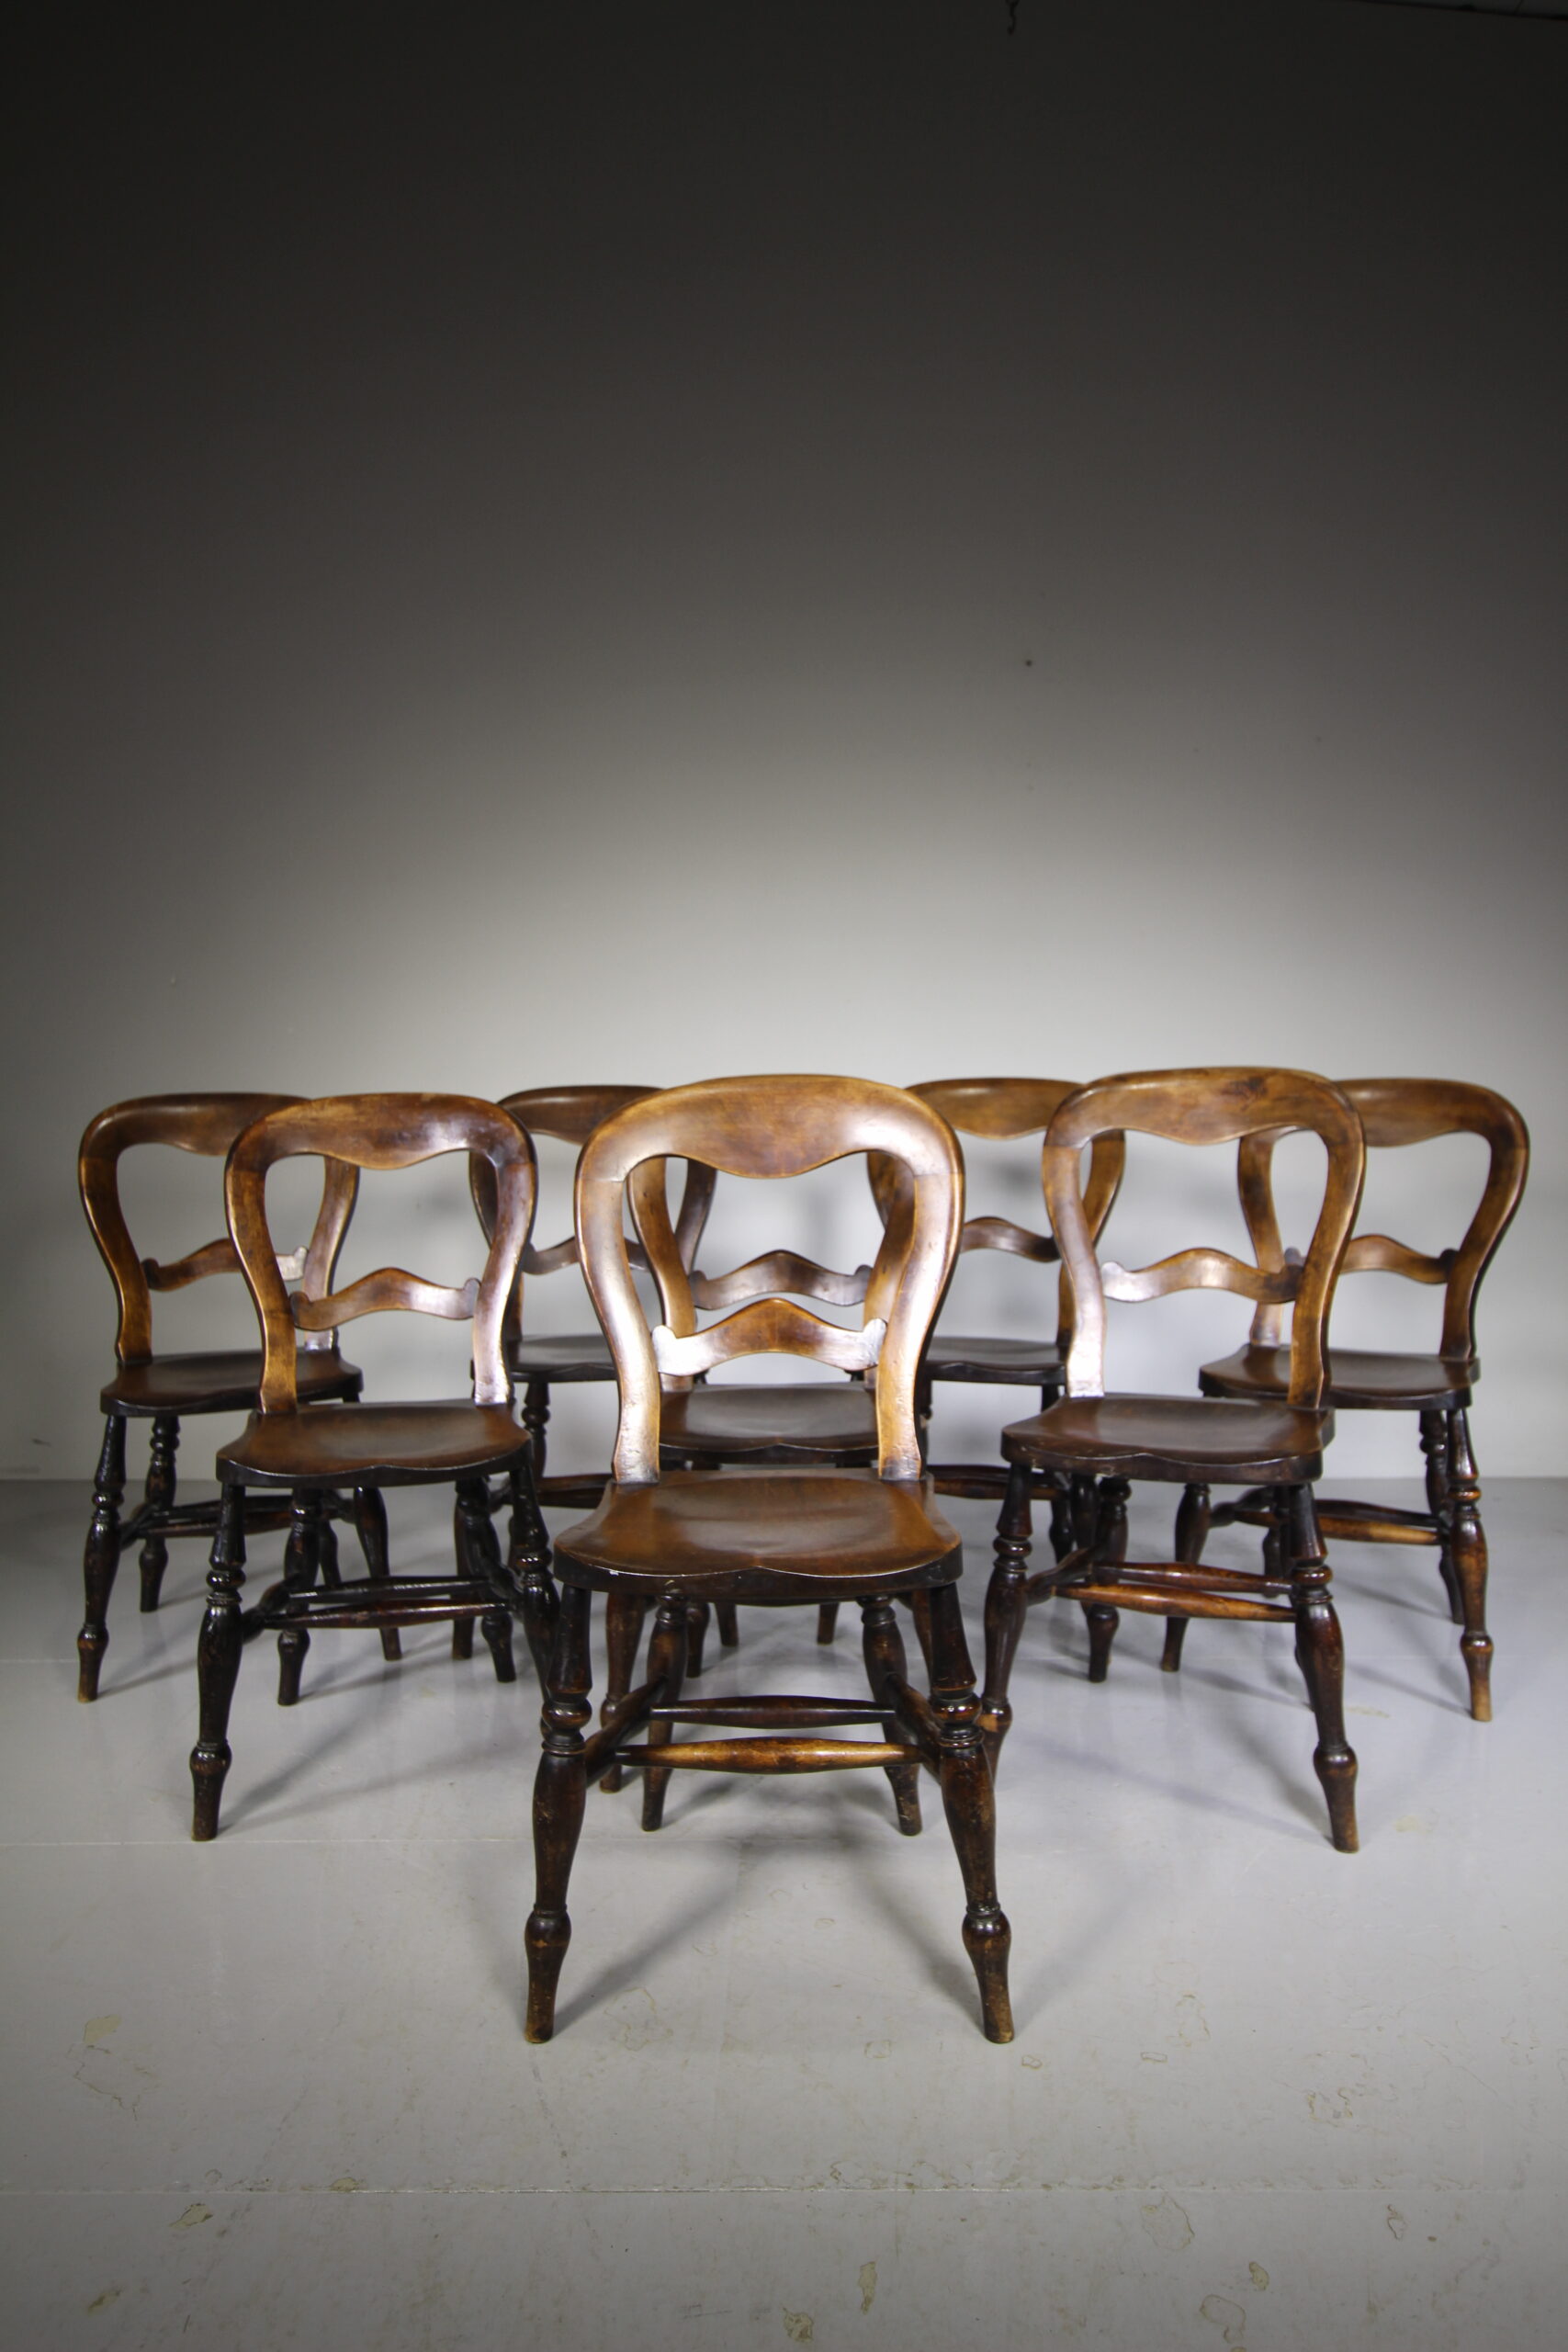 Set of Eight Country Antique Dining Chairs – Unusual Design